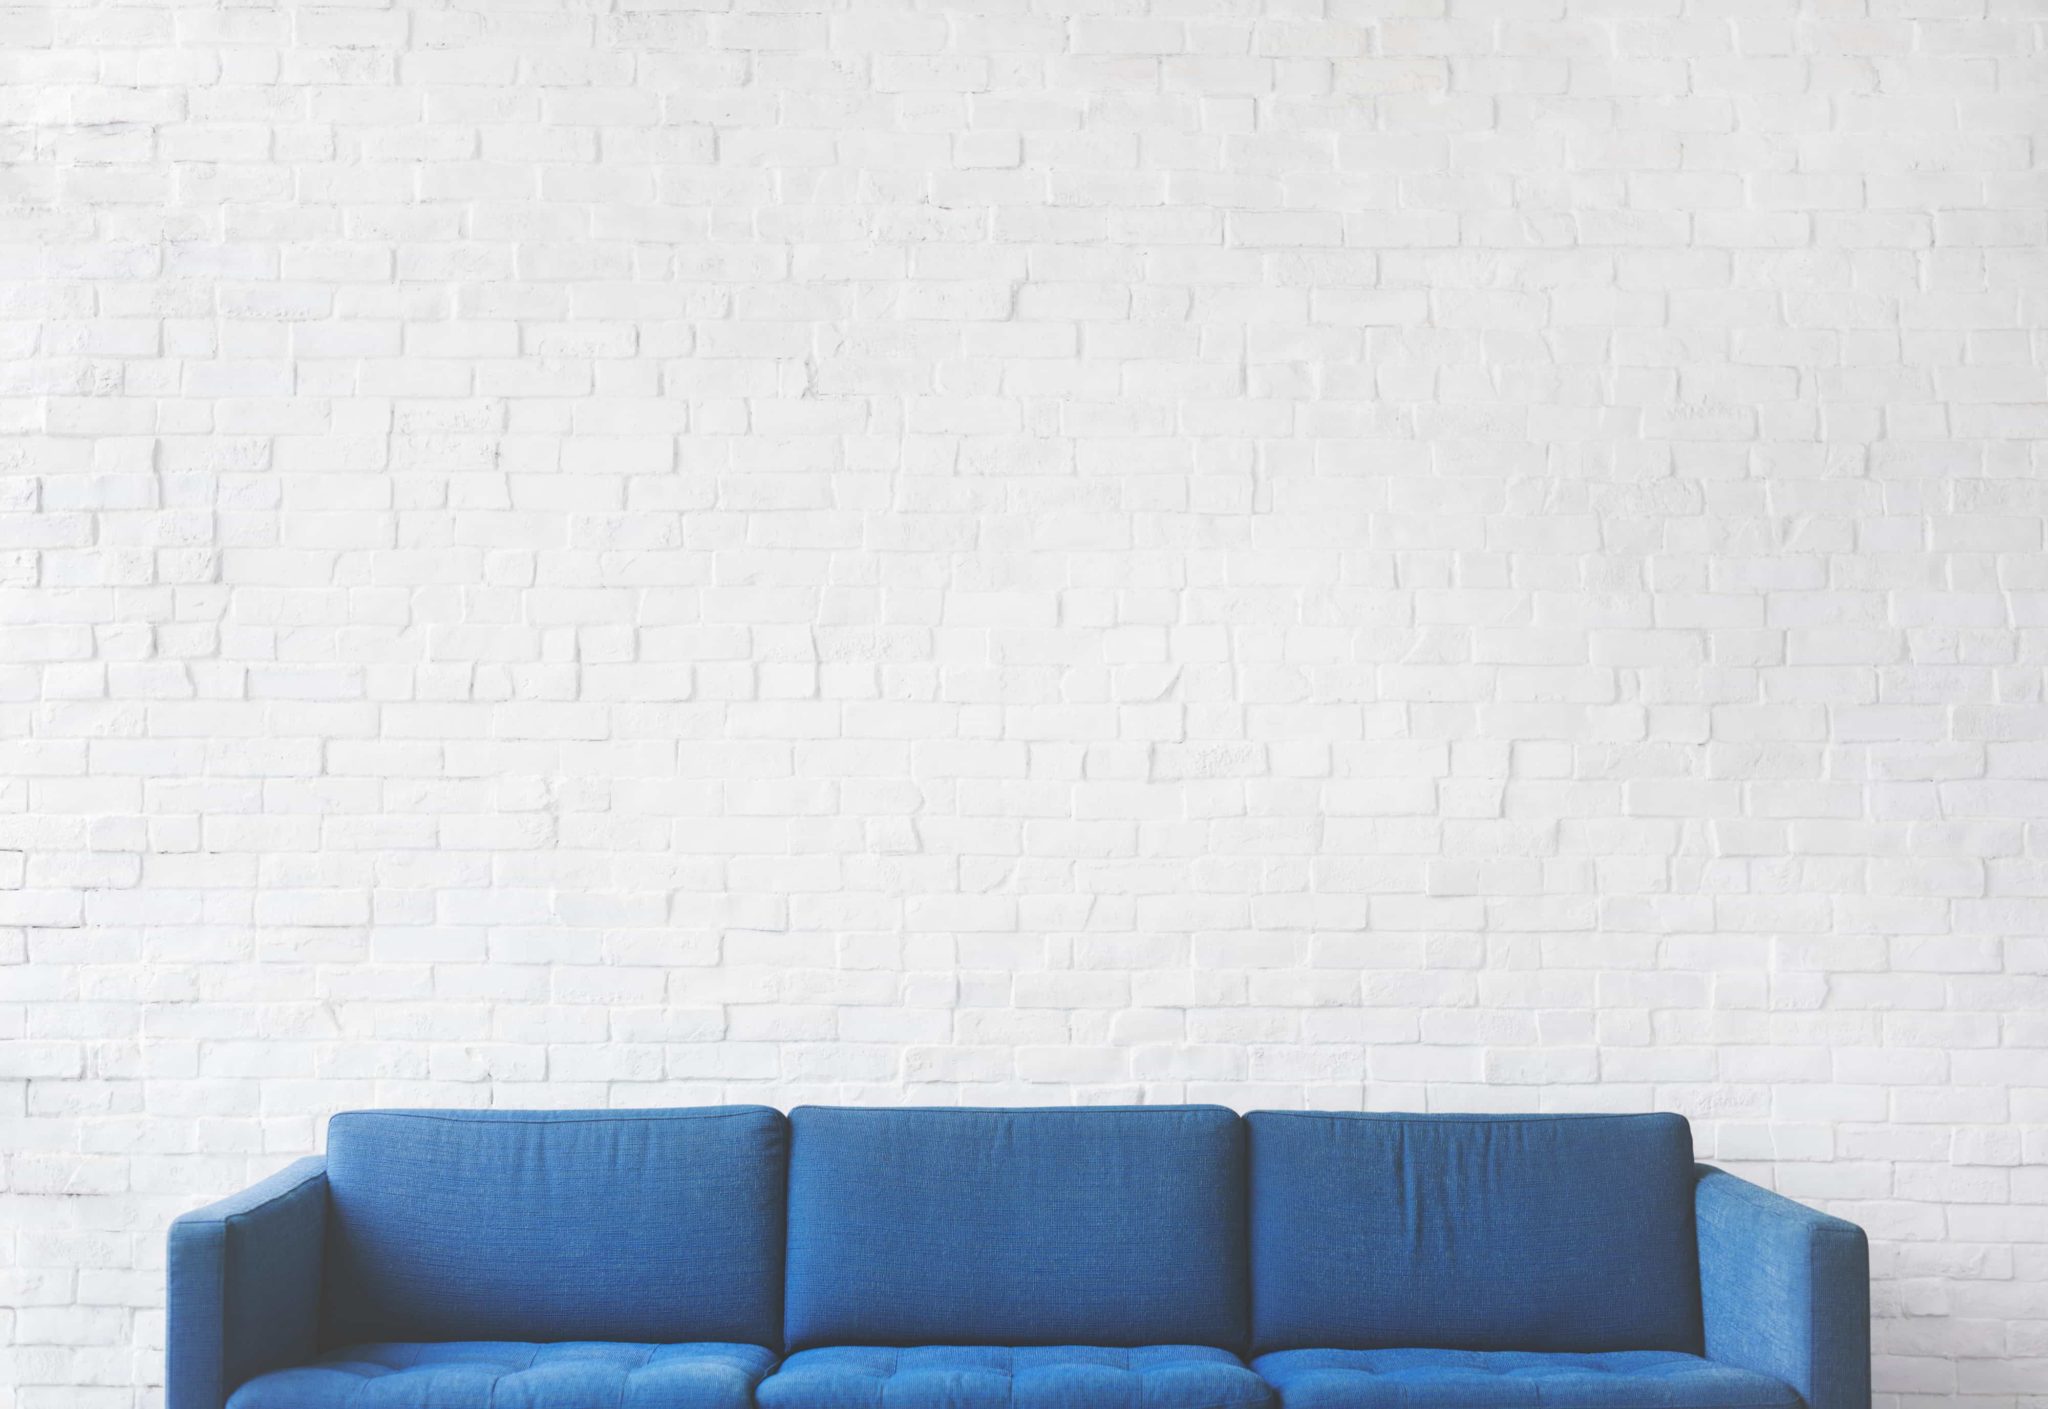 Image of blue sofa in front of white brick wall